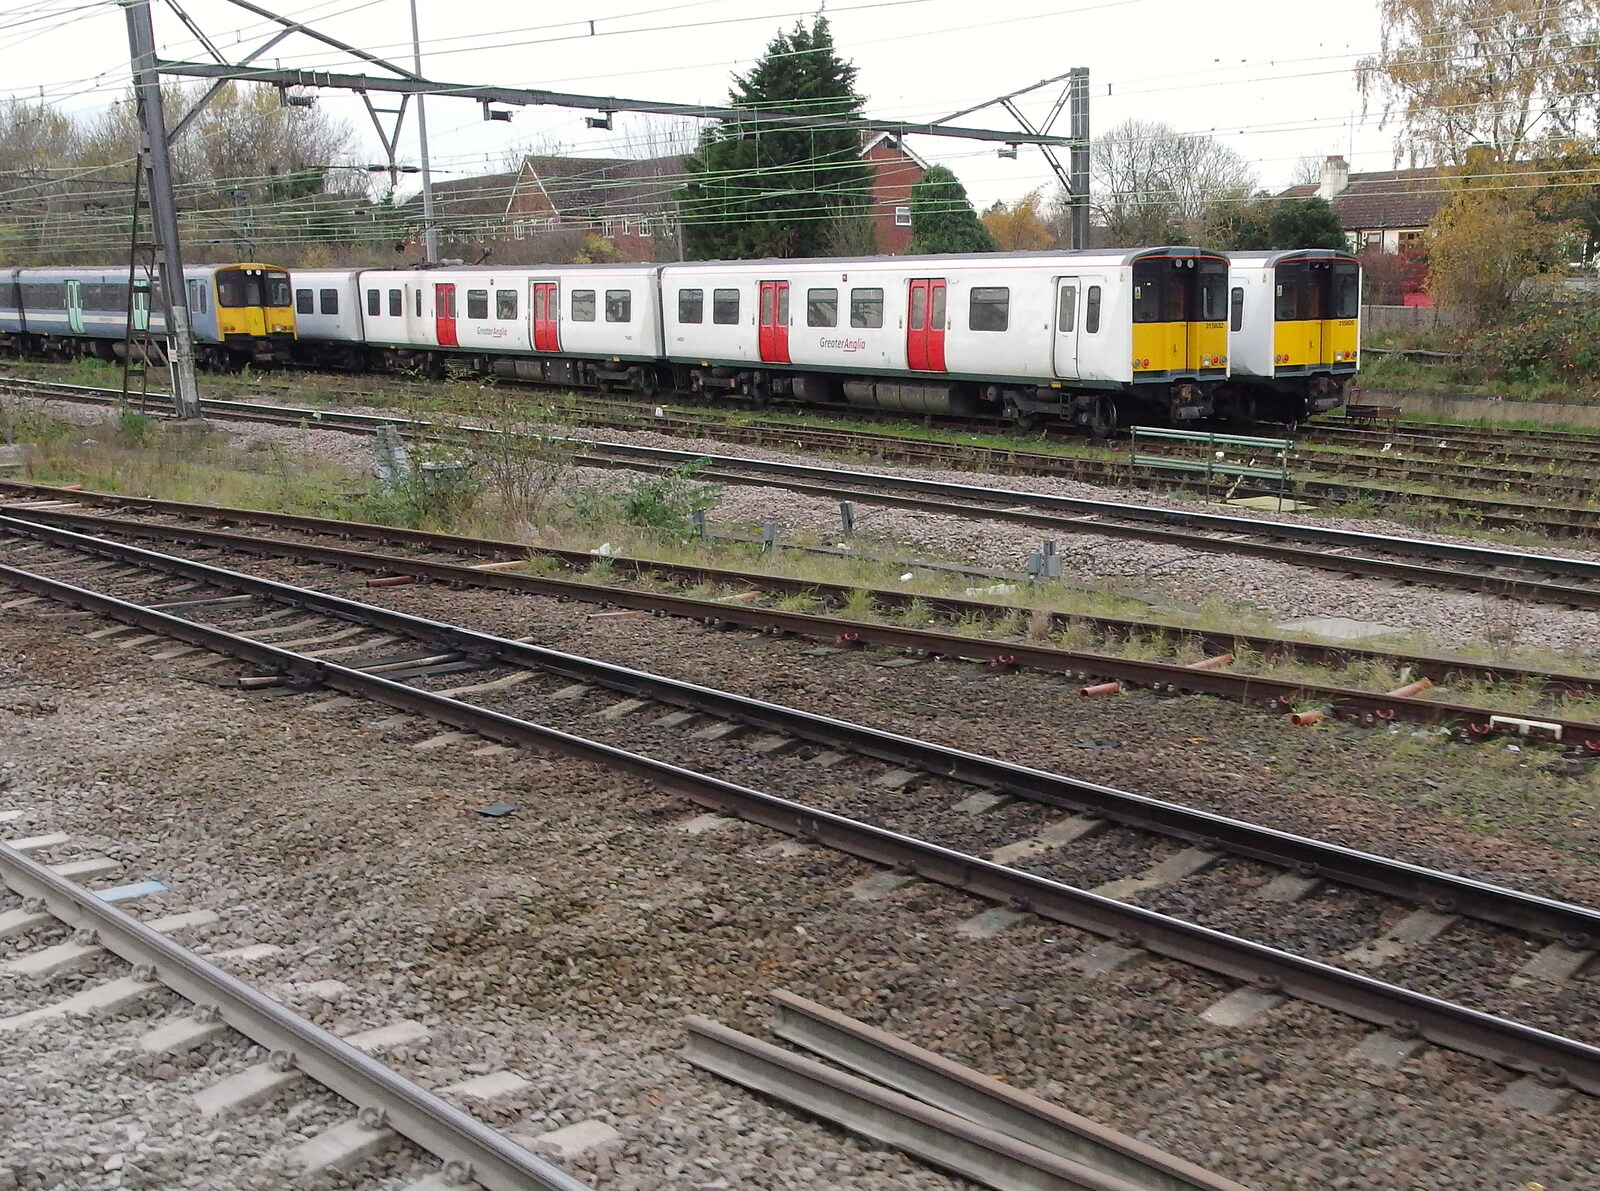 SwiftKey's Arcade Cabinet, and the Streets of Southwark, London - 5th December 2013: Class 315 'Tin can' commuter trains